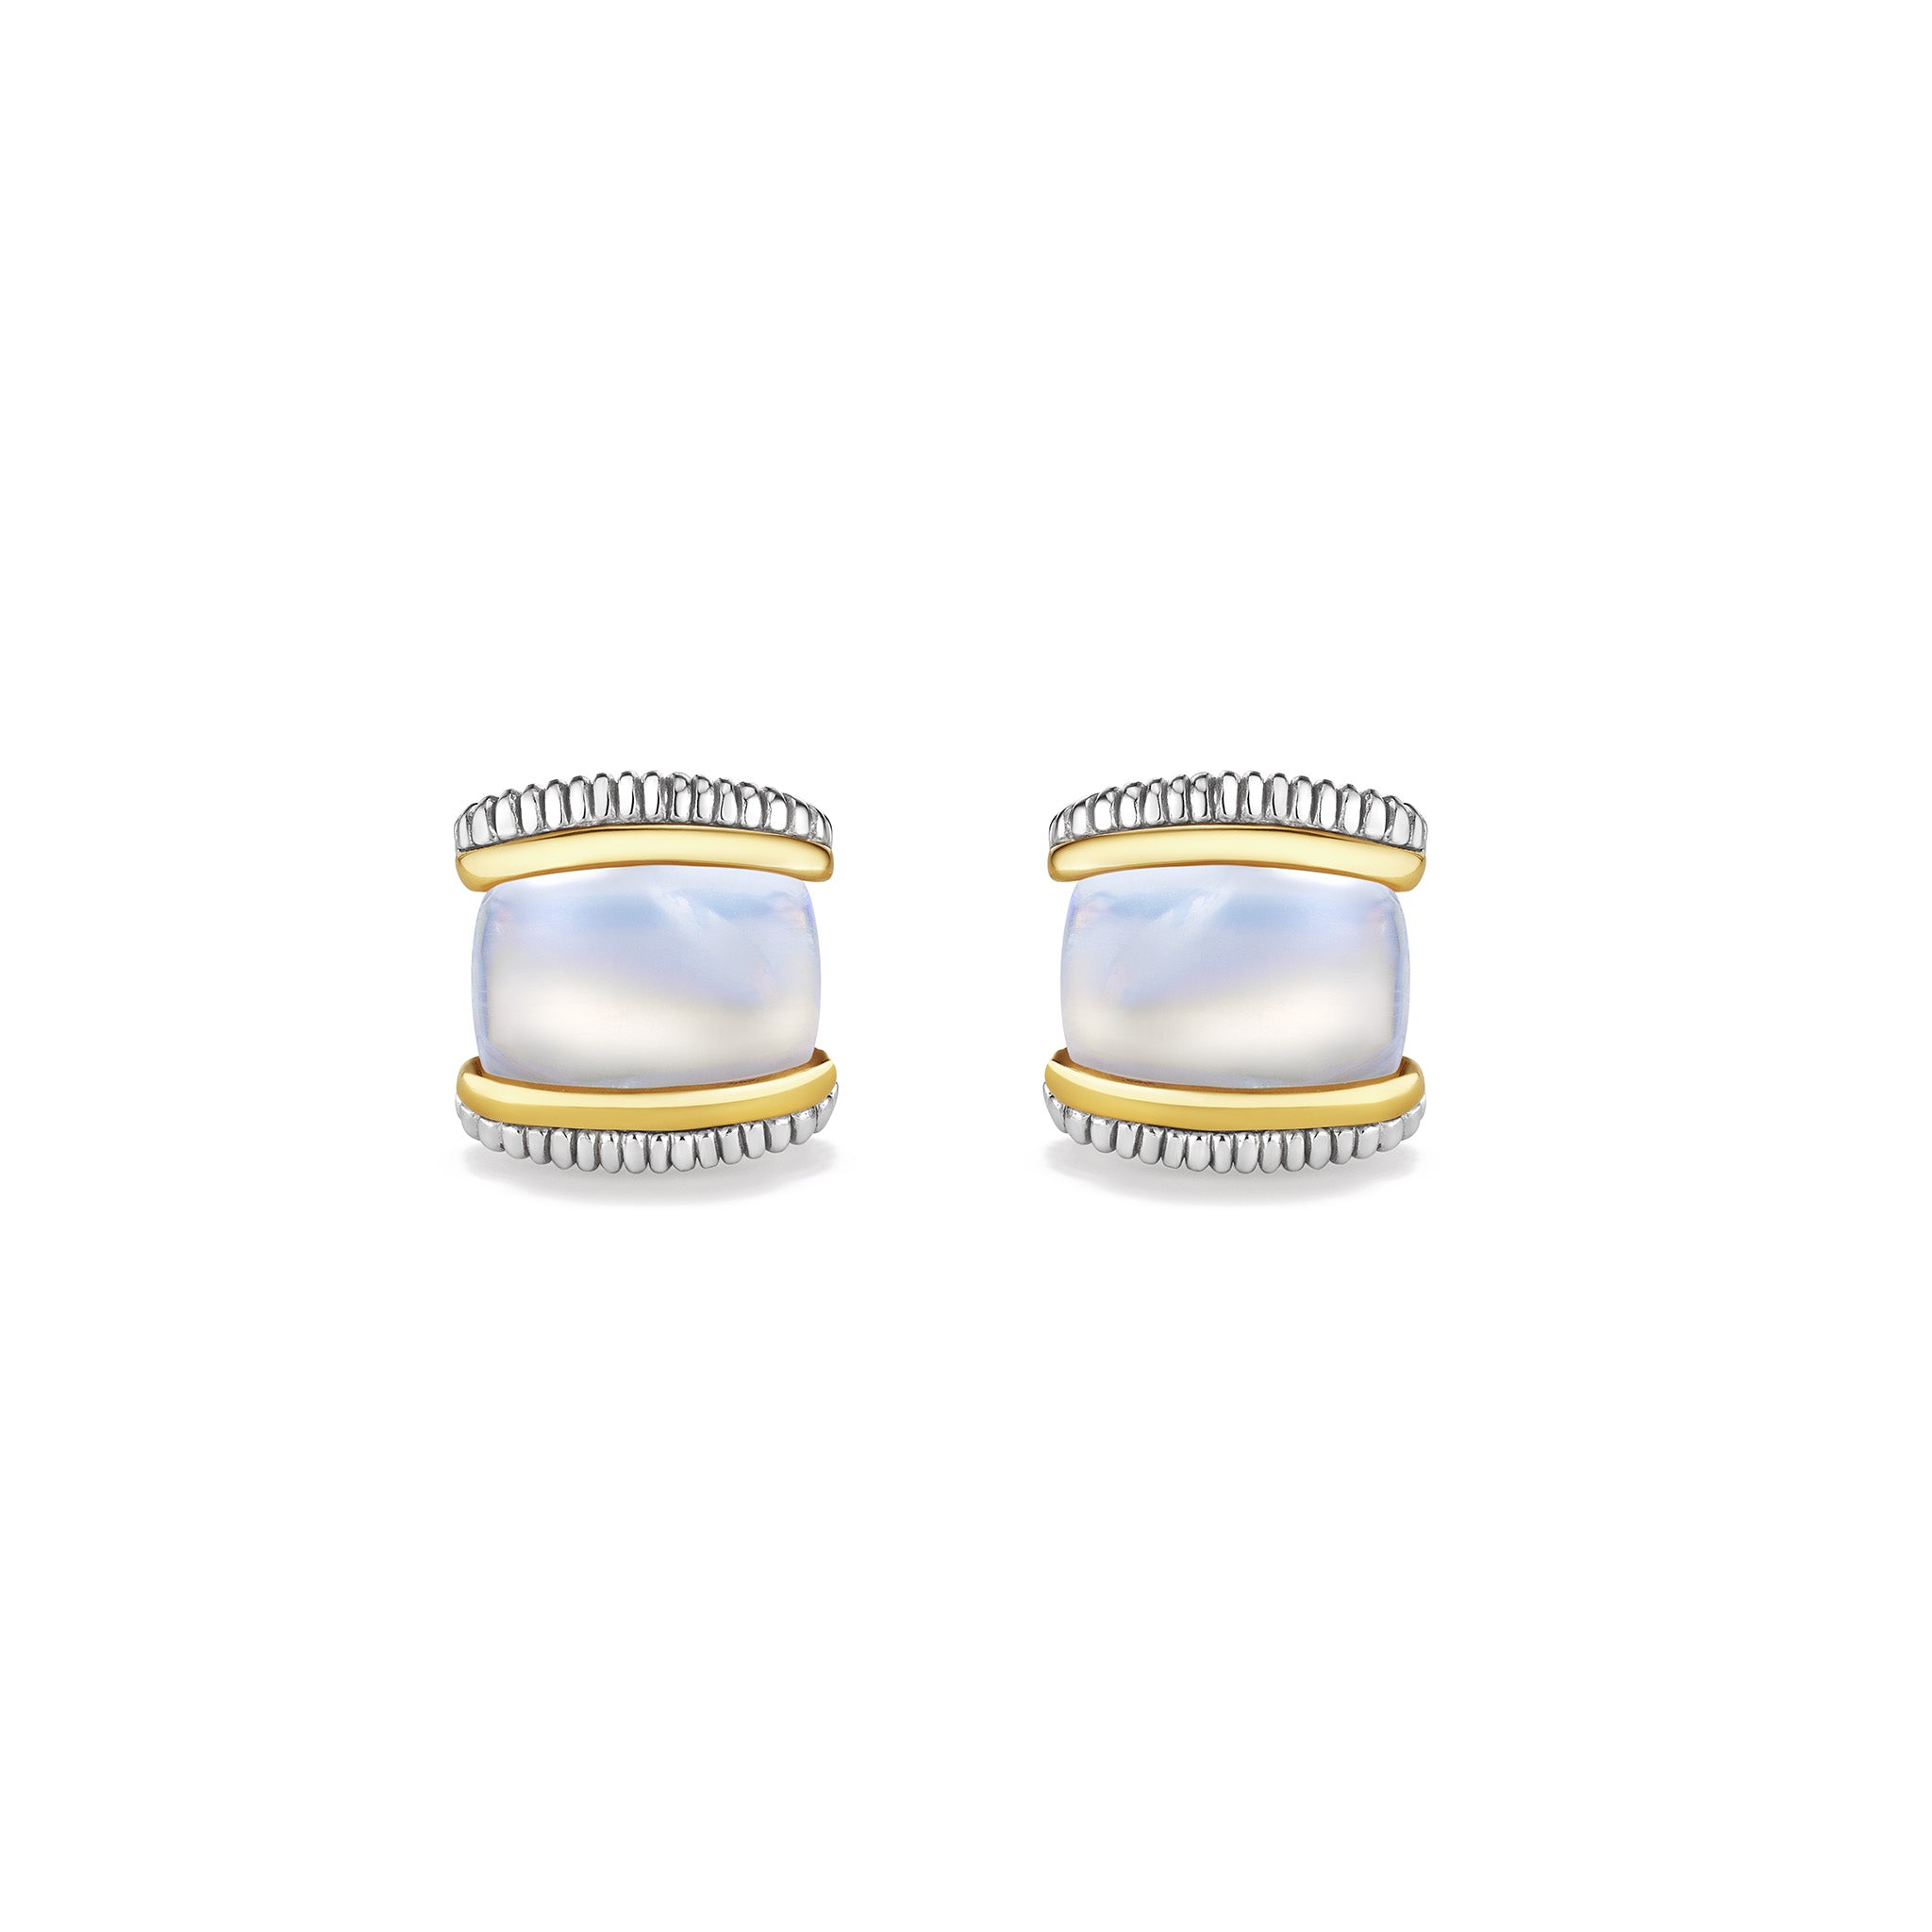 Eternity Stud Earrings with Rainbow Moonstone and 18K Gold